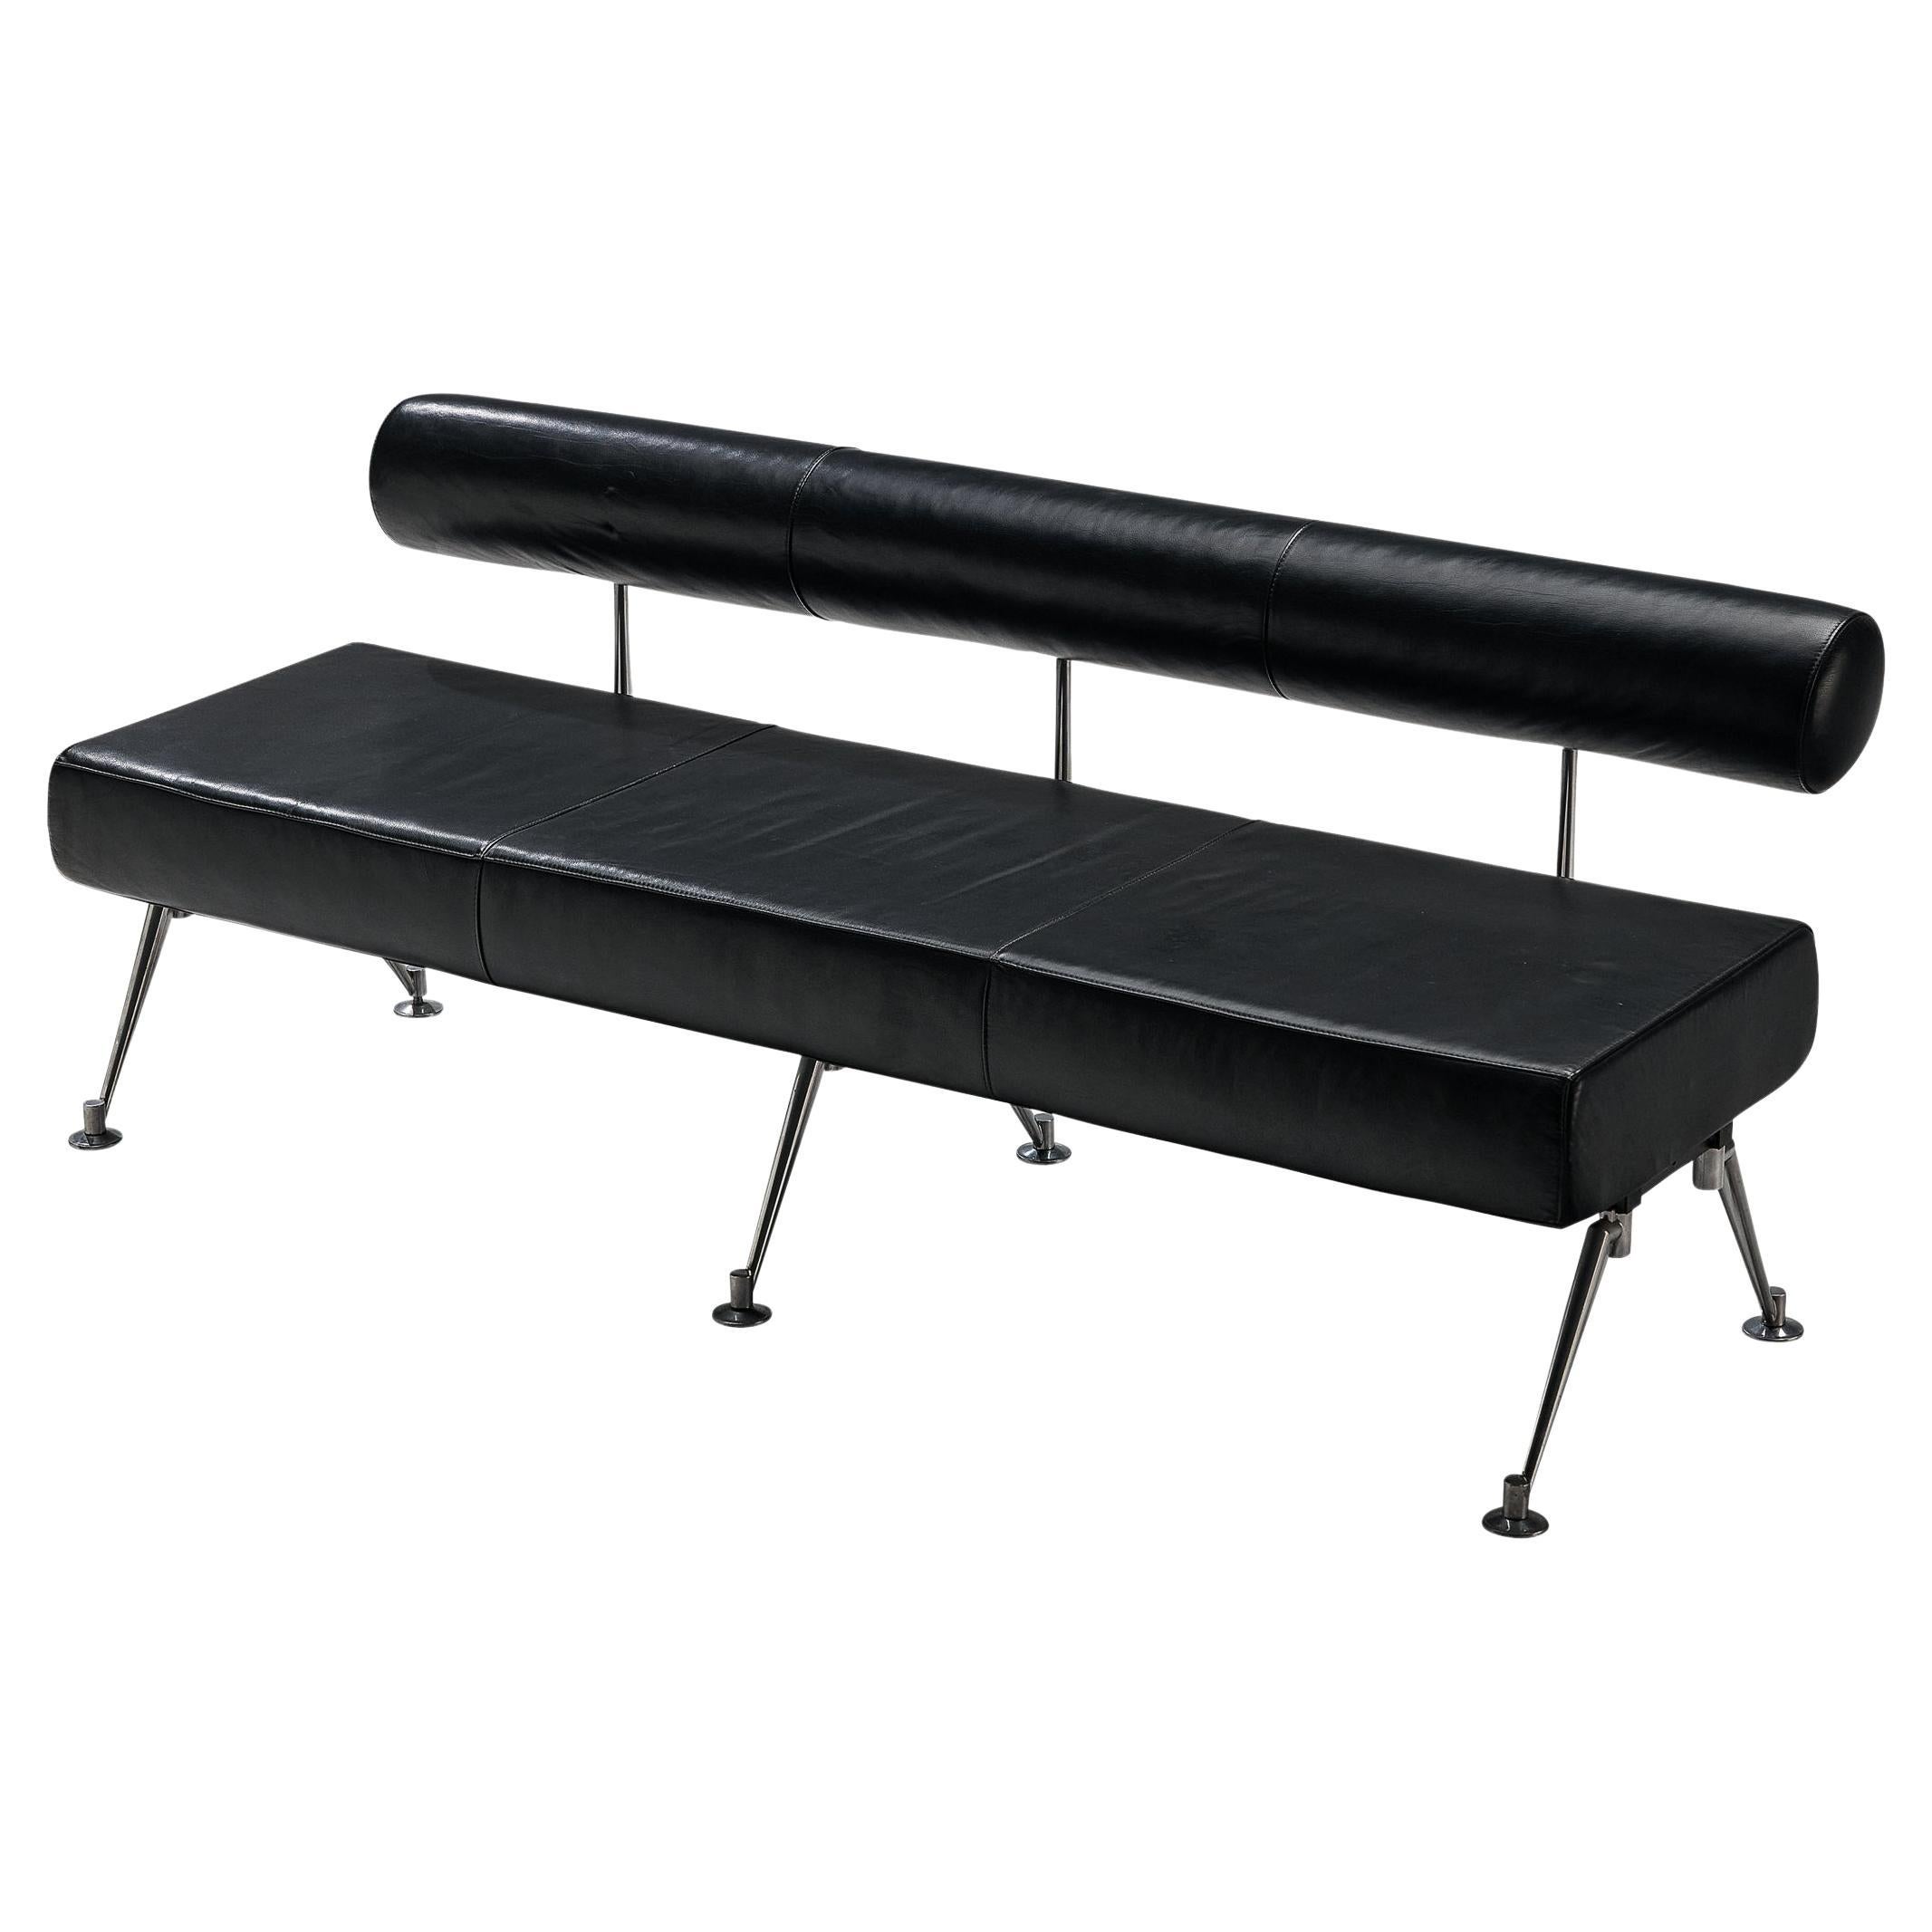 Minimalist Modern Sofa with Metal Frame and Black Leather For Sale at ...